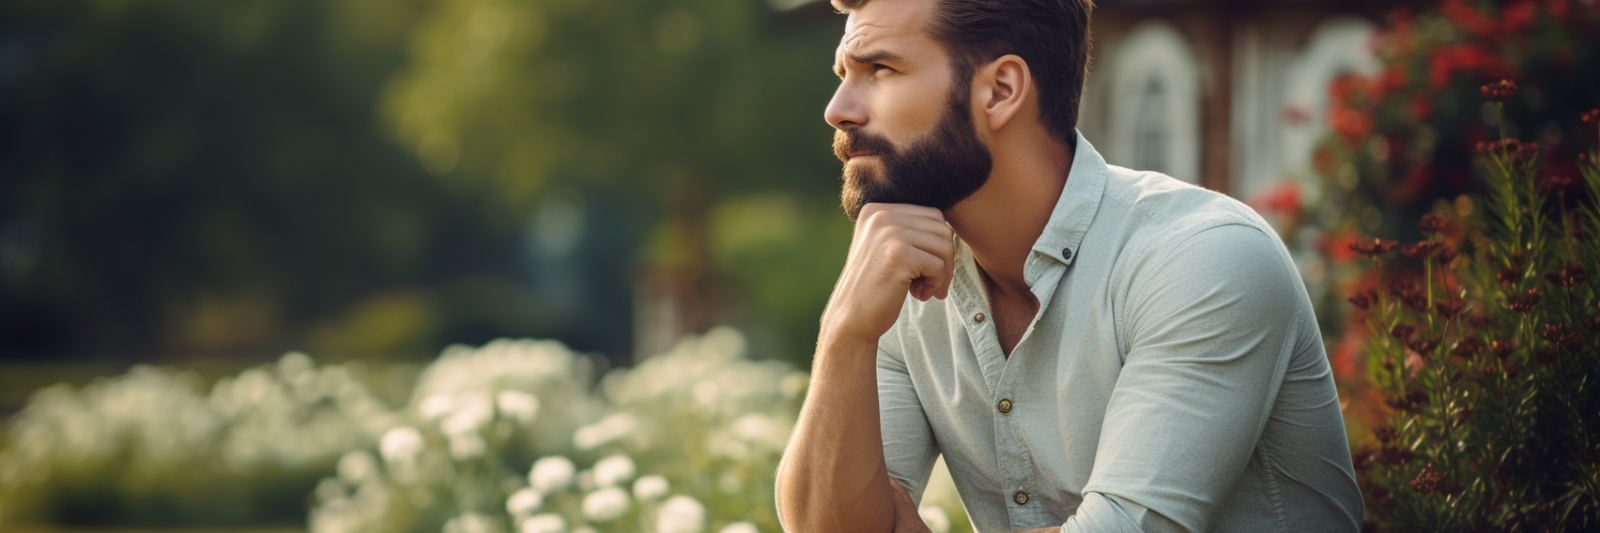 How to Grow a Beard: Your Complete Guide